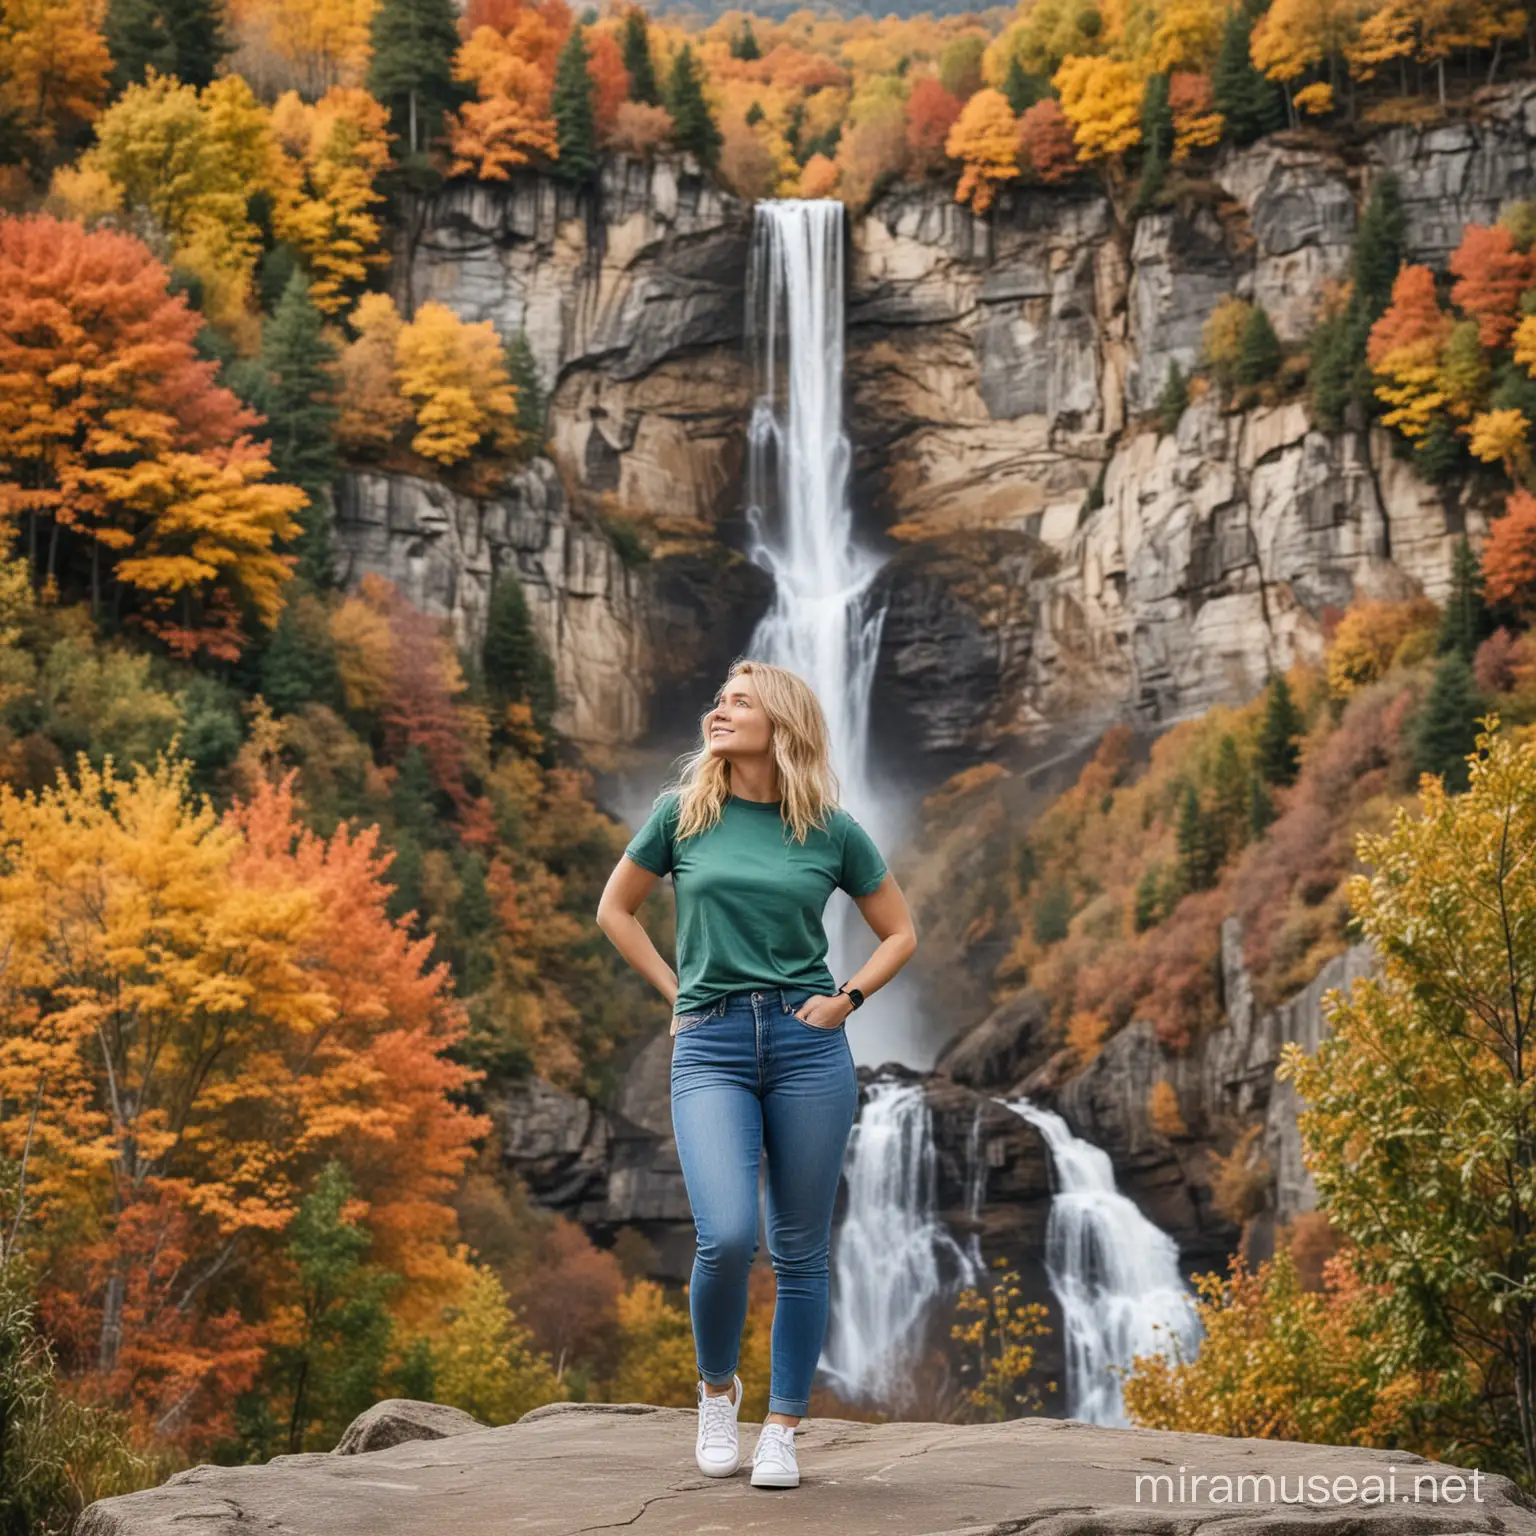 A woman with shoulder-length blonde hair is wearing a green T-shirt blue jeans and tennis shoes, the woman is standing at a mountain overlook and in the background is many trees in different Autumn colors and a large waterfall